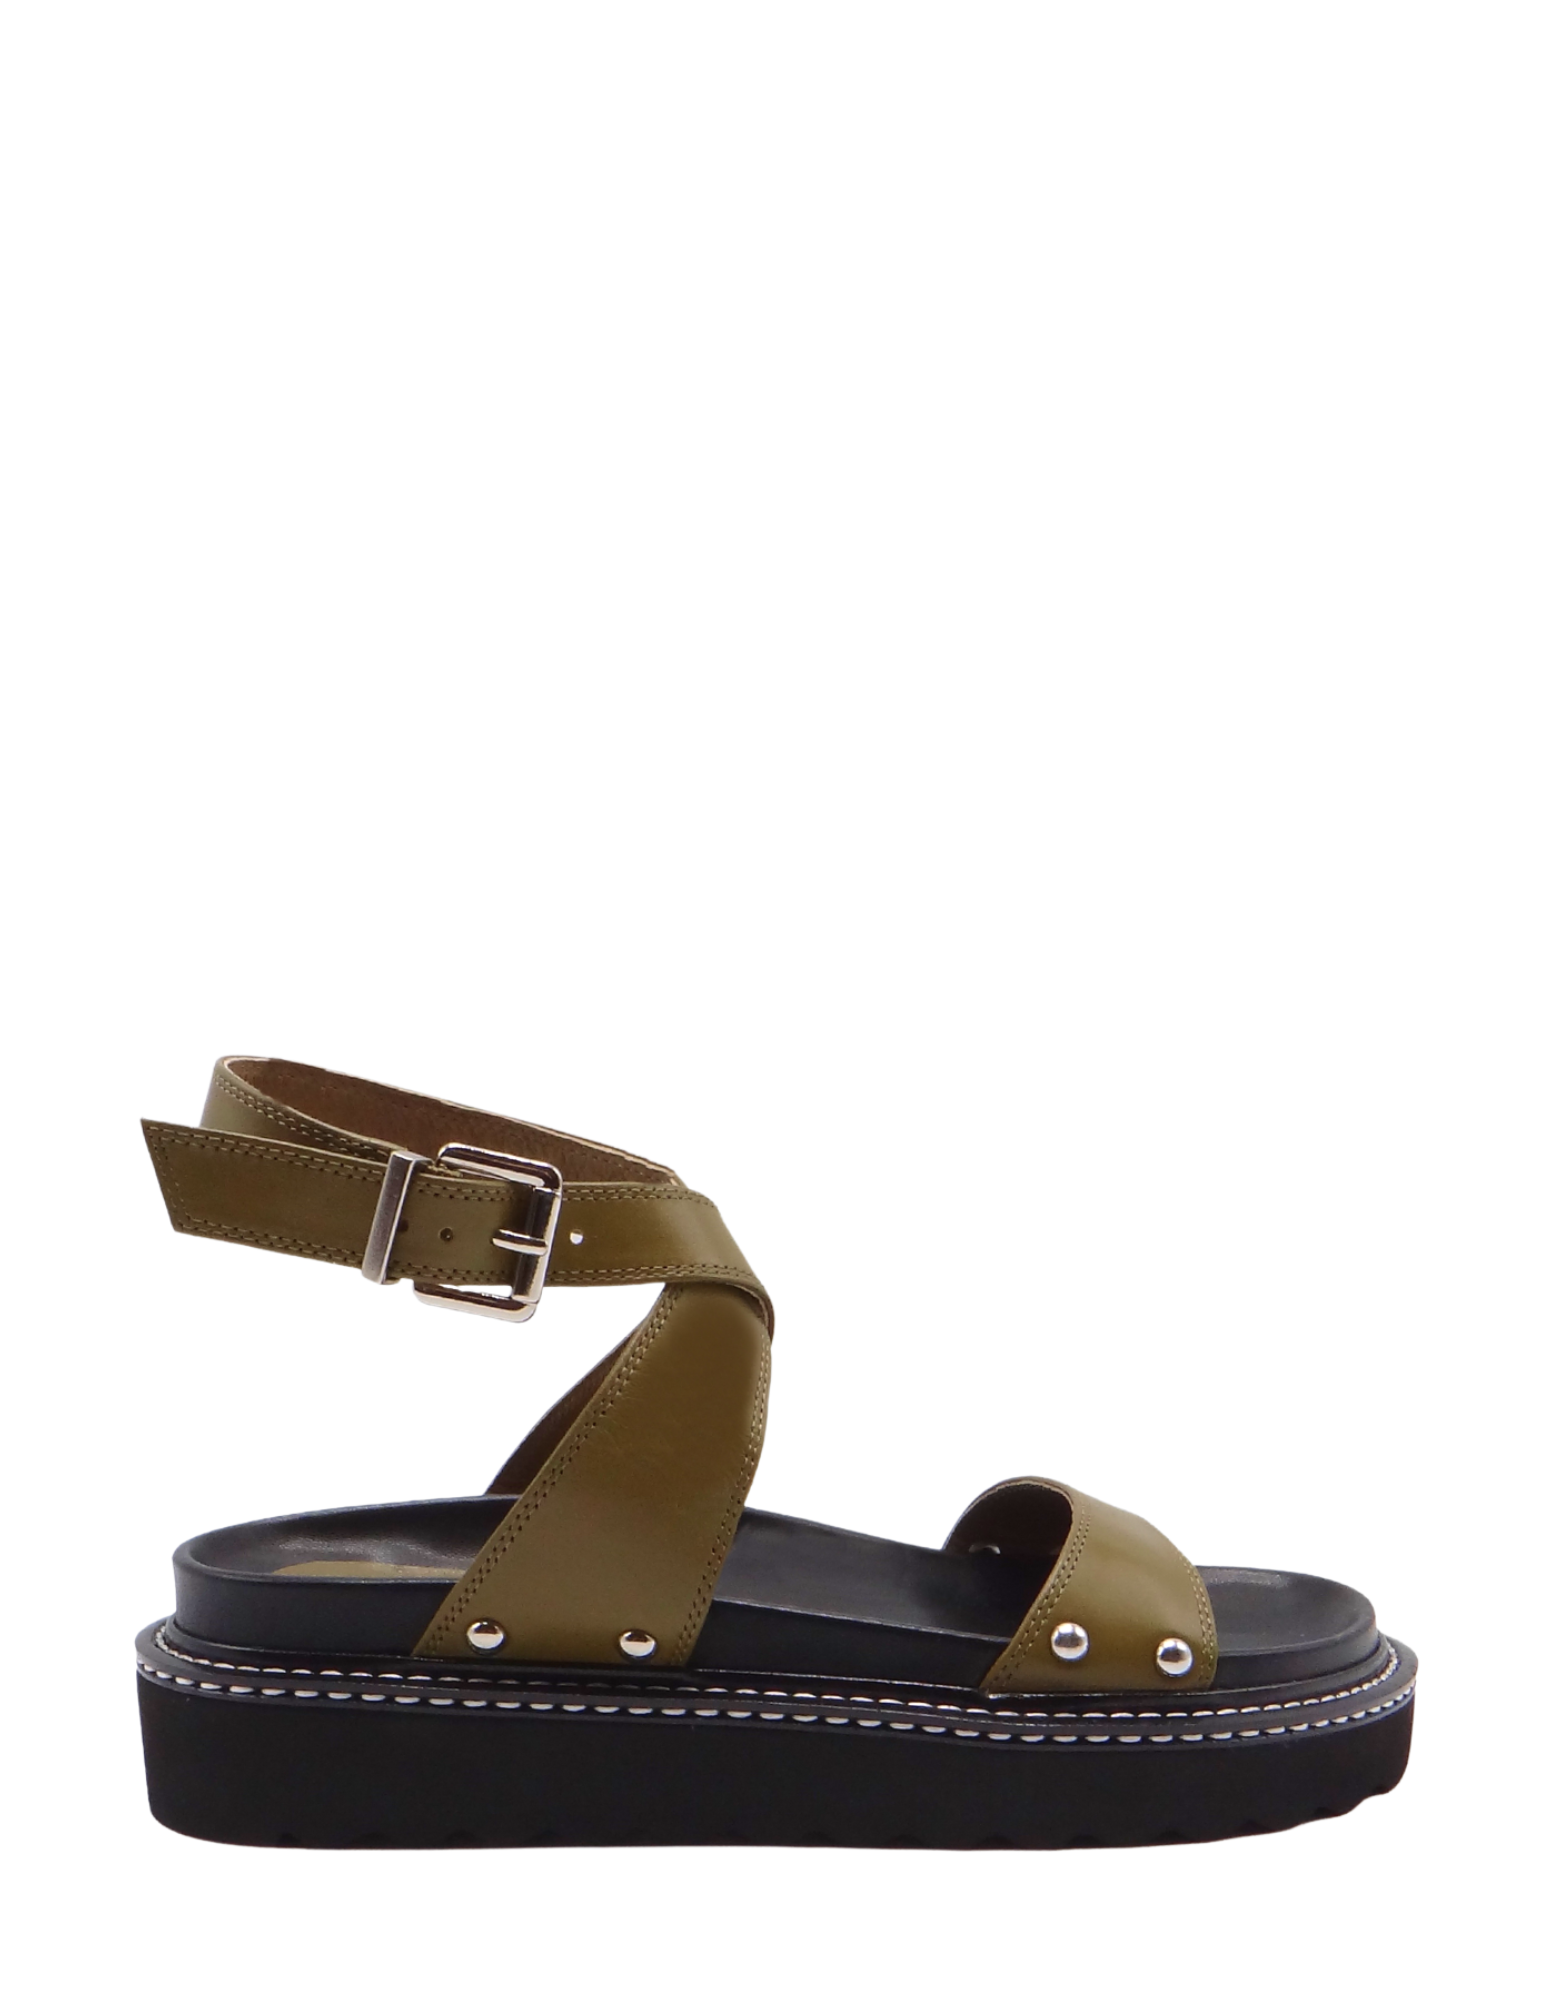 CAVERLEY Earnie Sandal in Olive 23S520C Olive FROM EIGHTYWINGOLD - OFFICIAL BRAND PARTNER